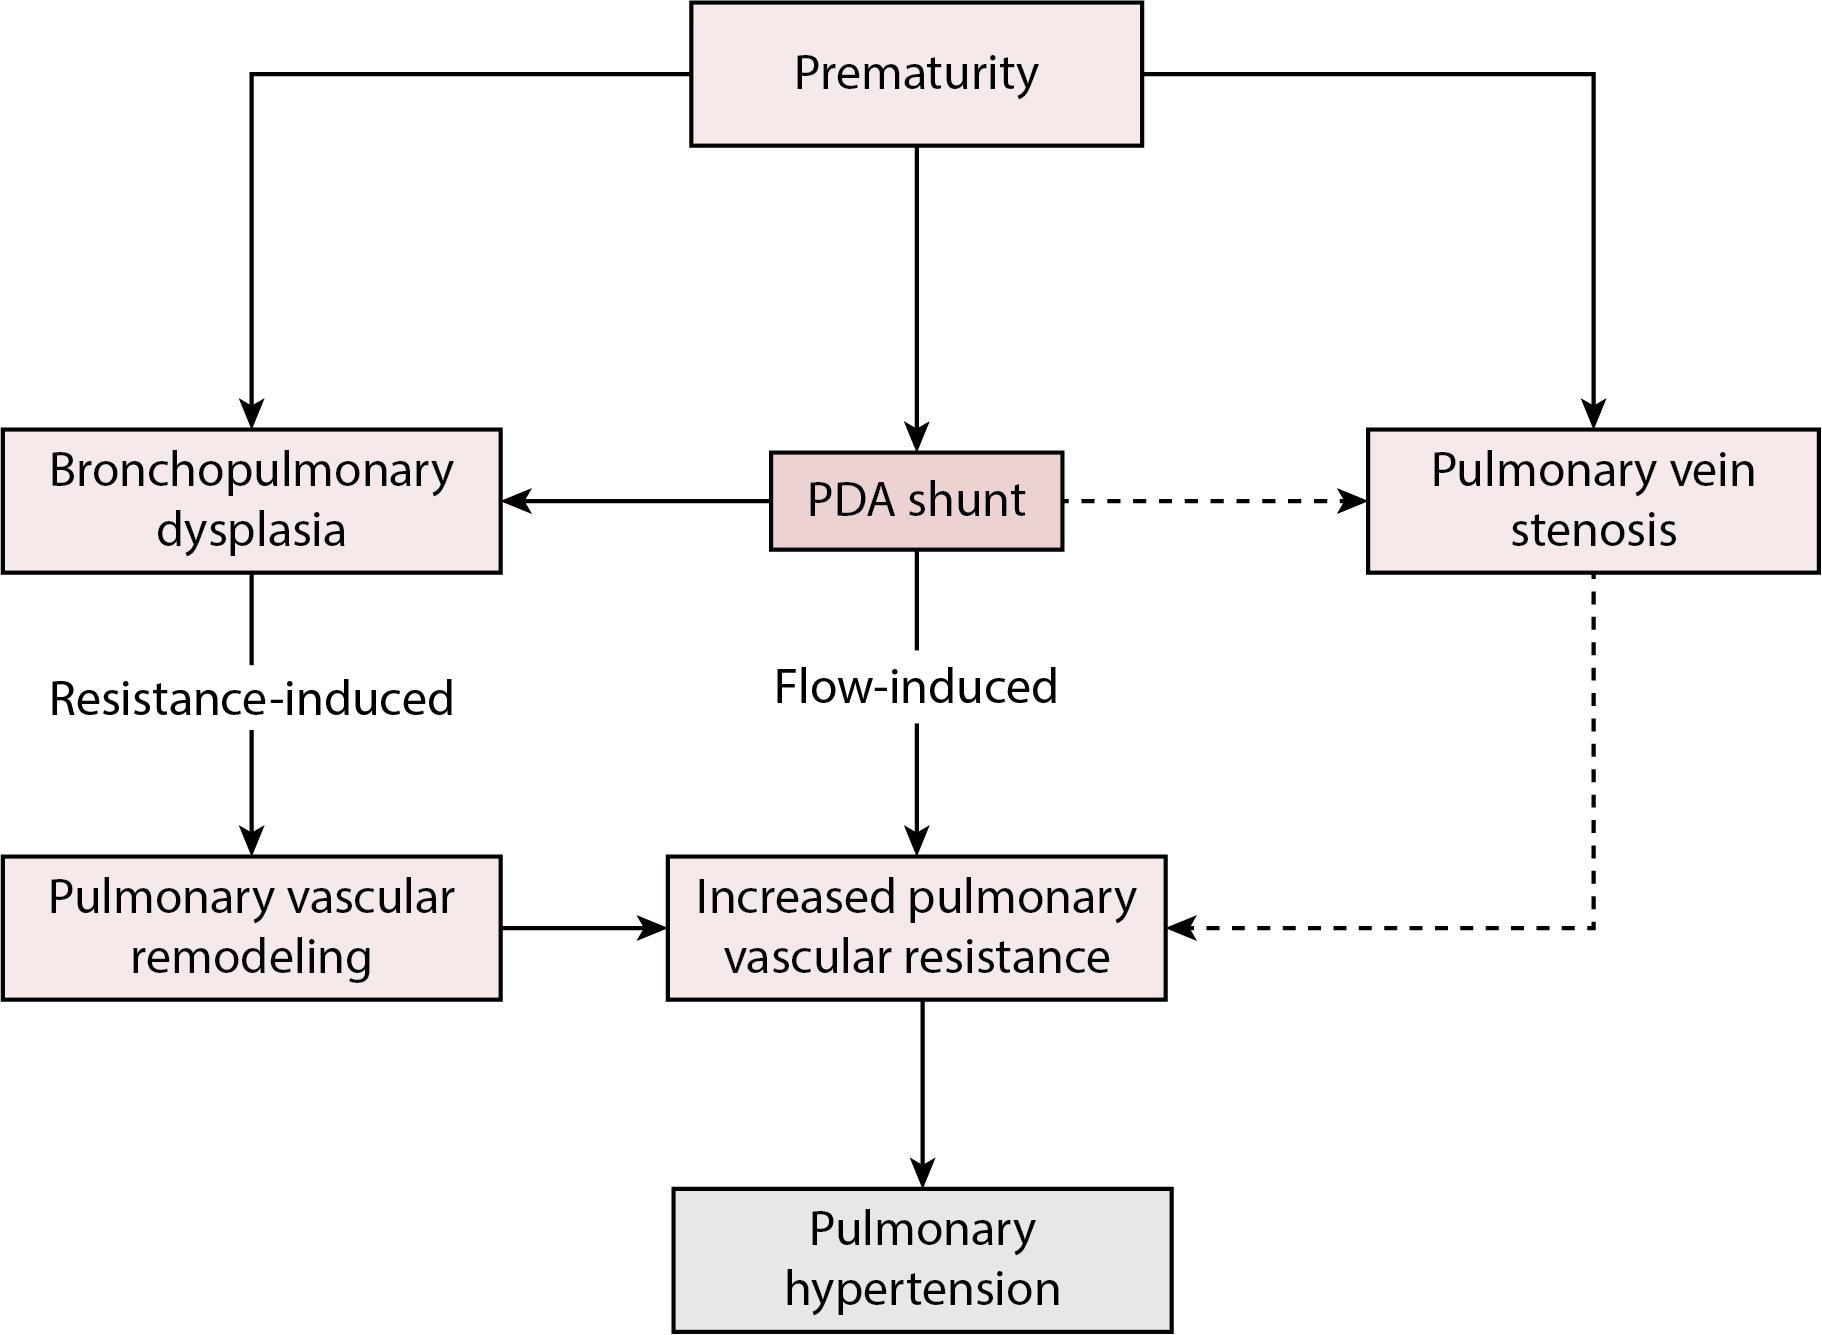 Fig. 18.1, Different contributors of pulmonary hypertension in the setting of patent ductus arteriosus shunt.